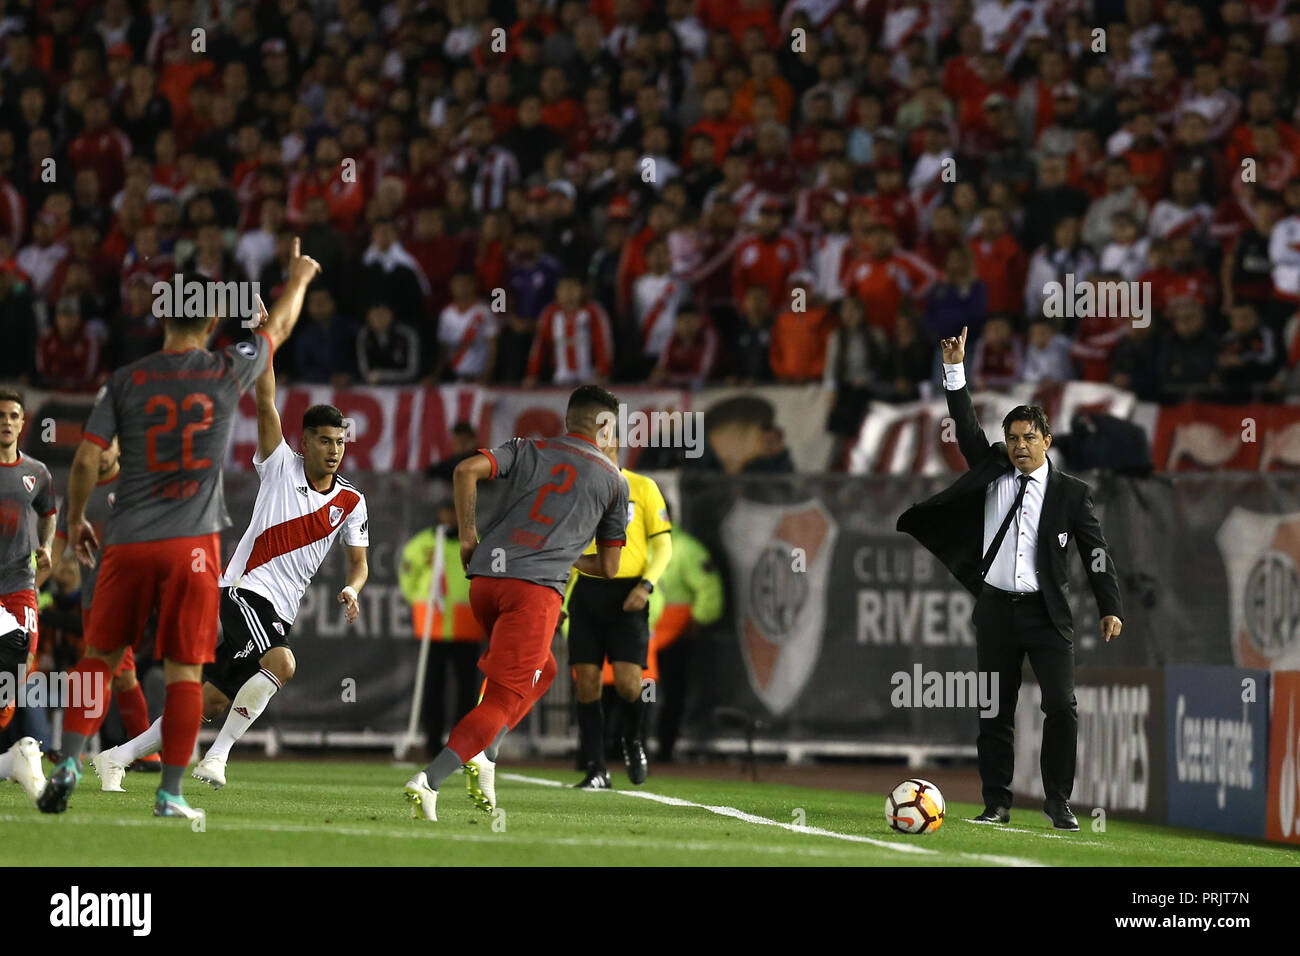 Marcelo Gallardo (DT River) giving directions in the match river - independiente Stock Photo